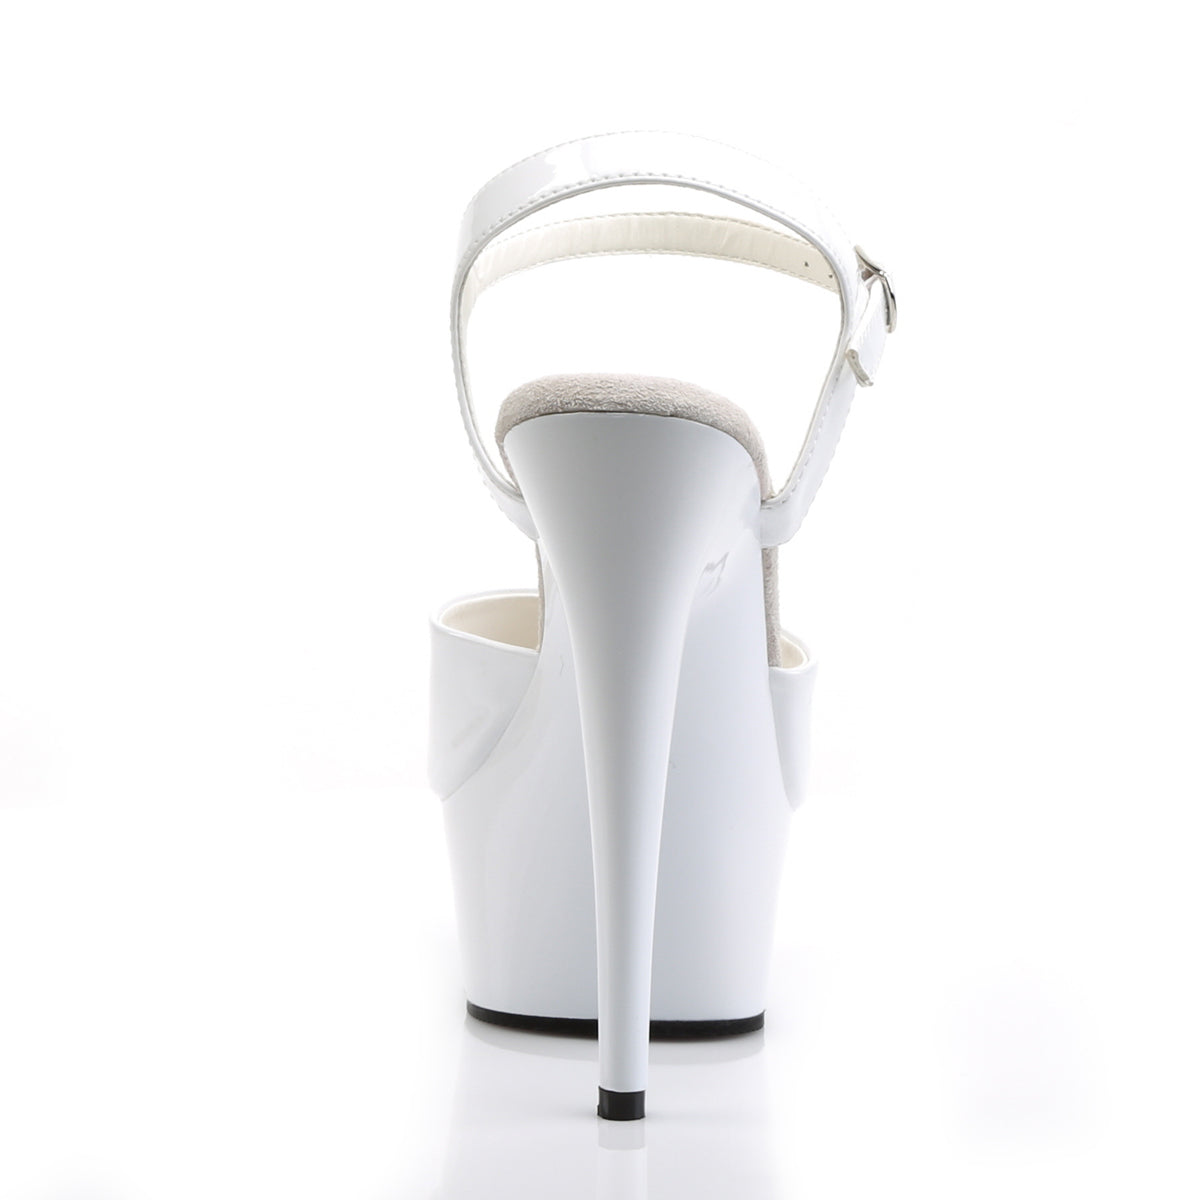 DELIGHT-609 6" Heel White Patent Pole Dancing Platforms-Pleaser- Sexy Shoes Fetish Footwear